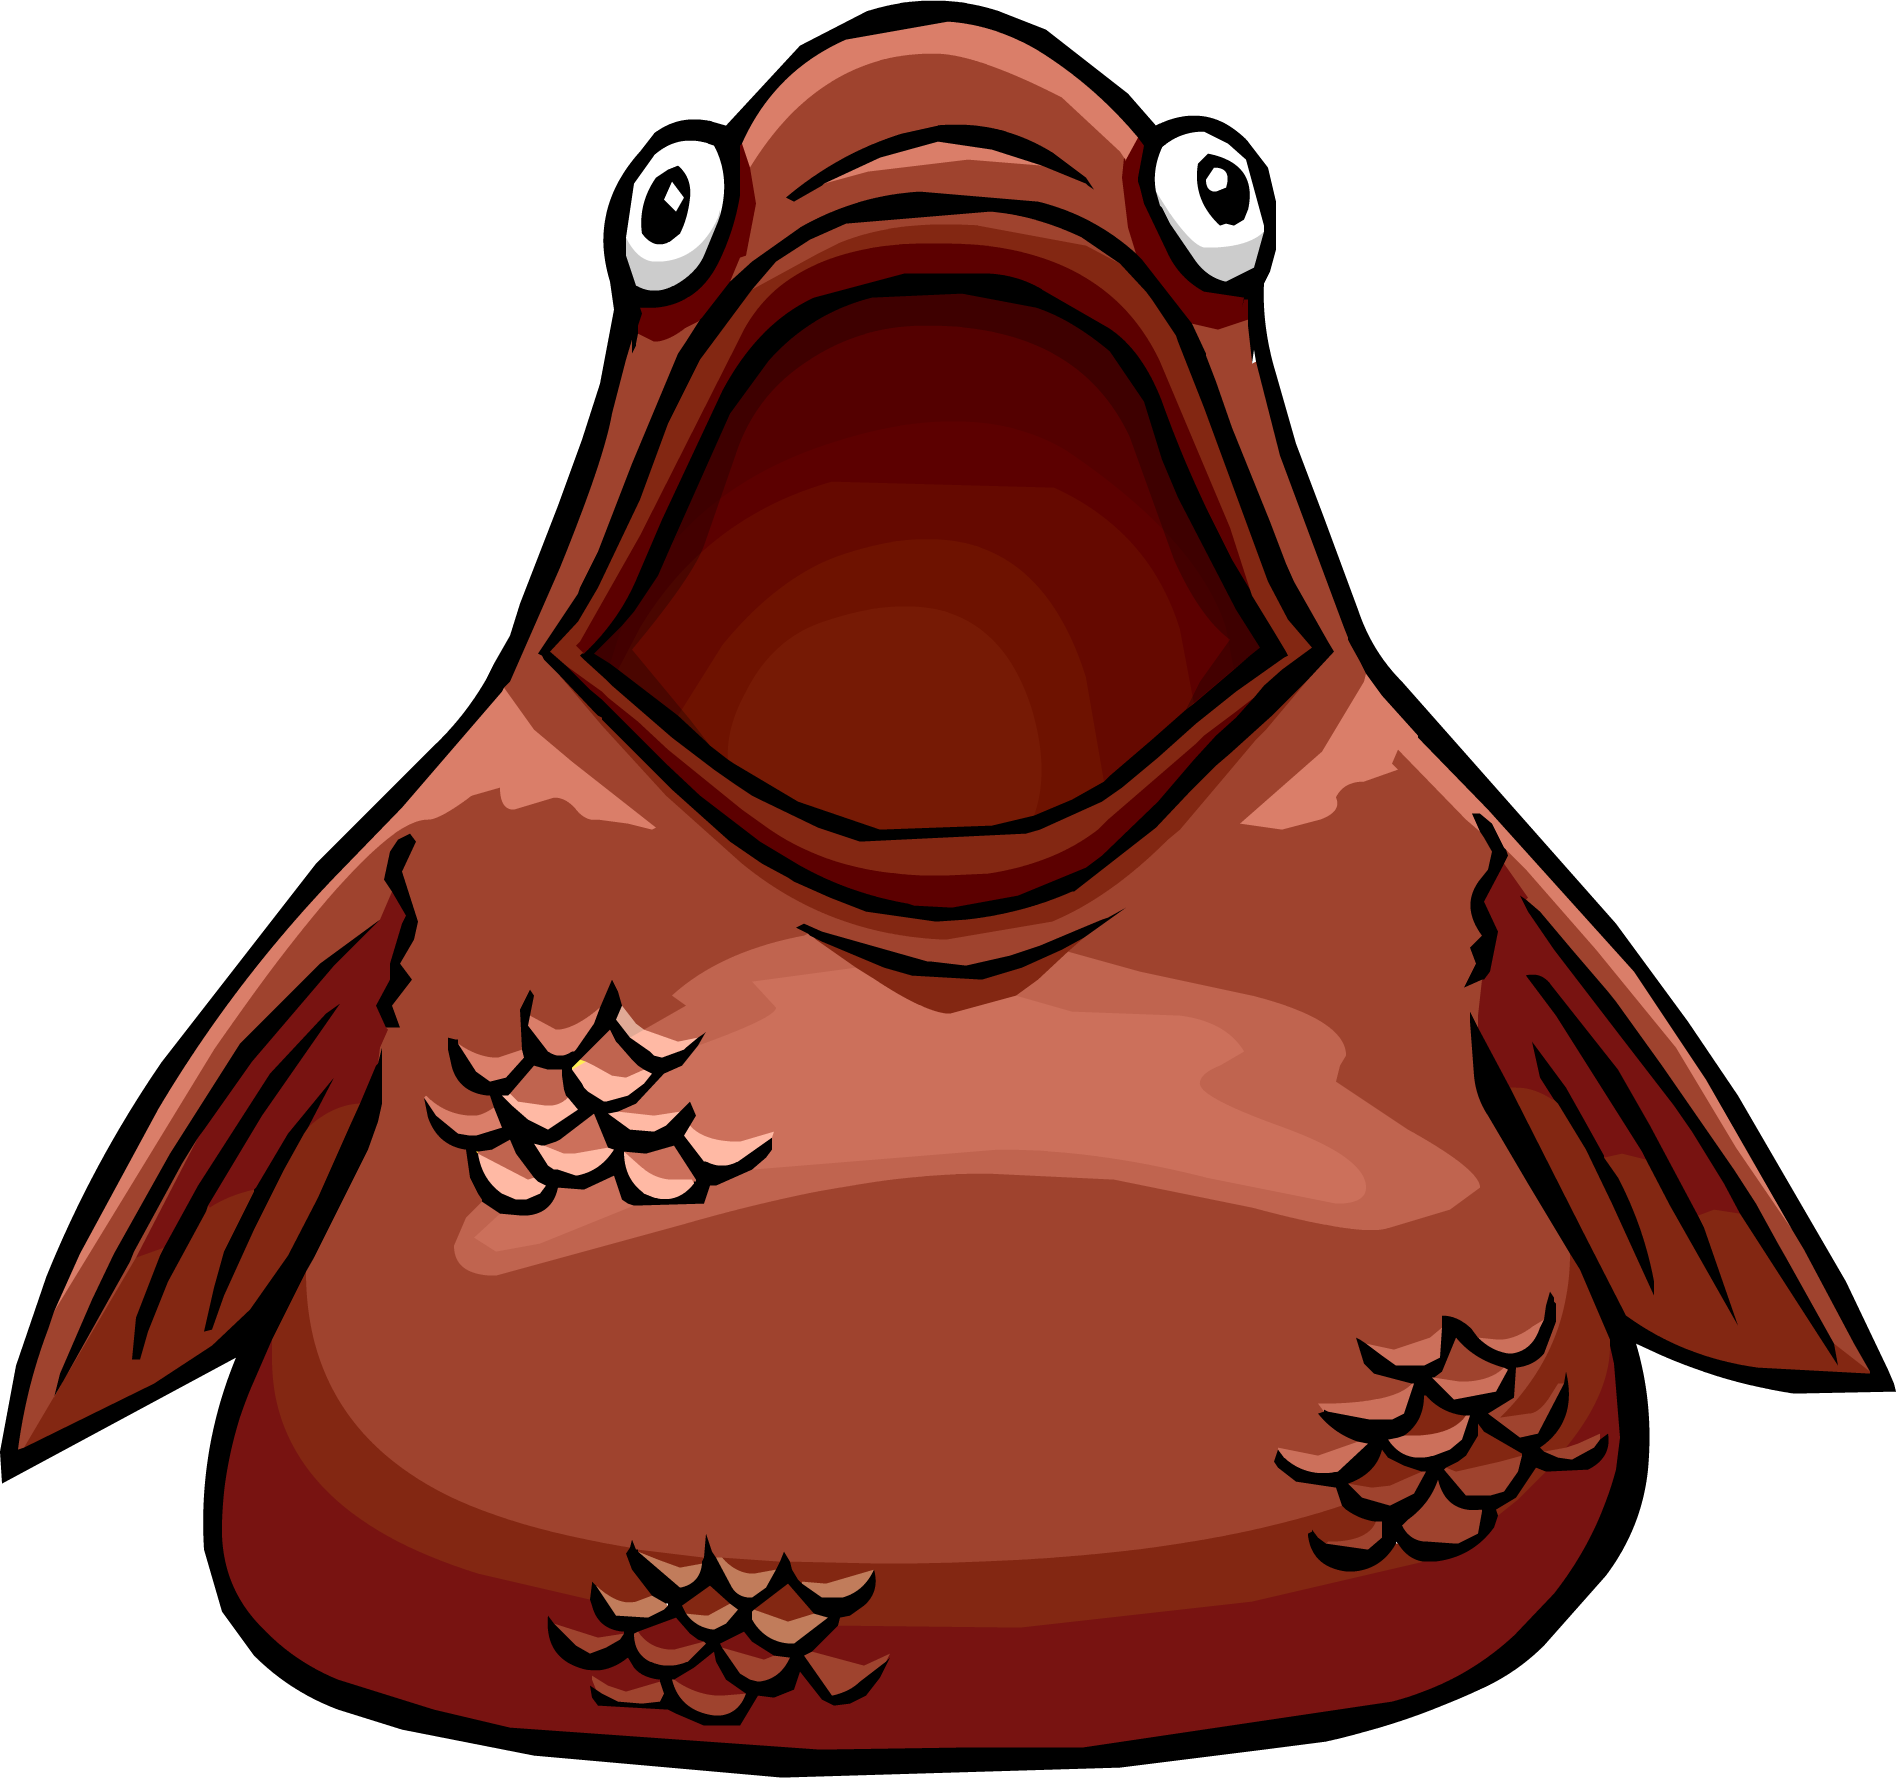 Wise Fish Costume - Red Fish From Club Penguin (1896x1778)